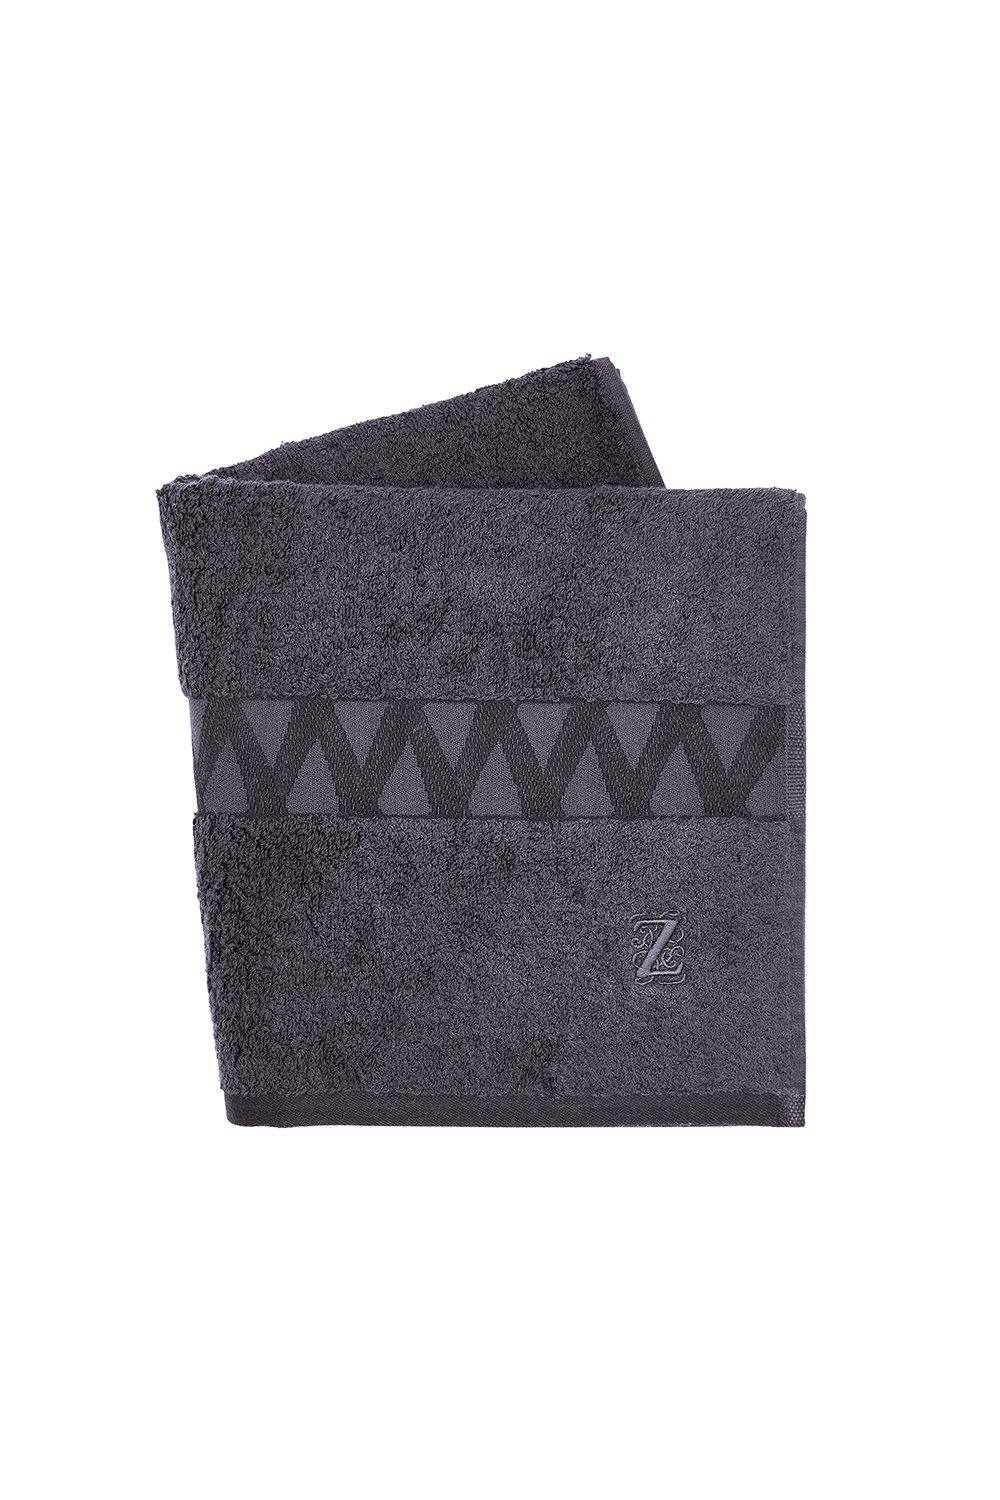 'Zoffany Organic' Embroidered Towel